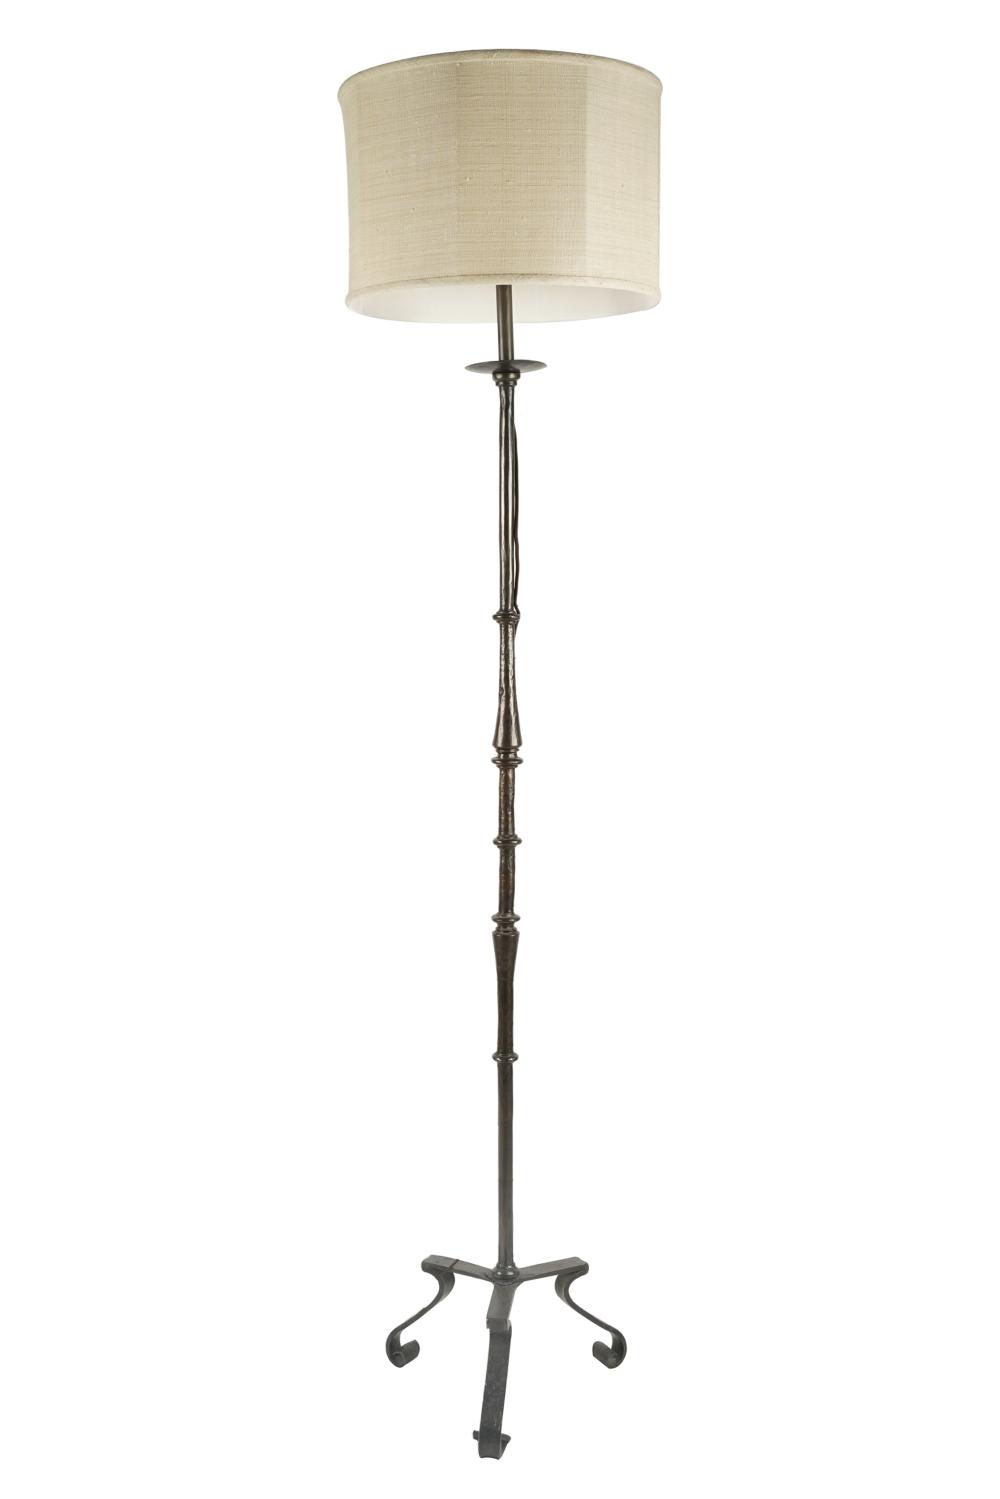 IRON FLOOR LAMPwith fitted shade: